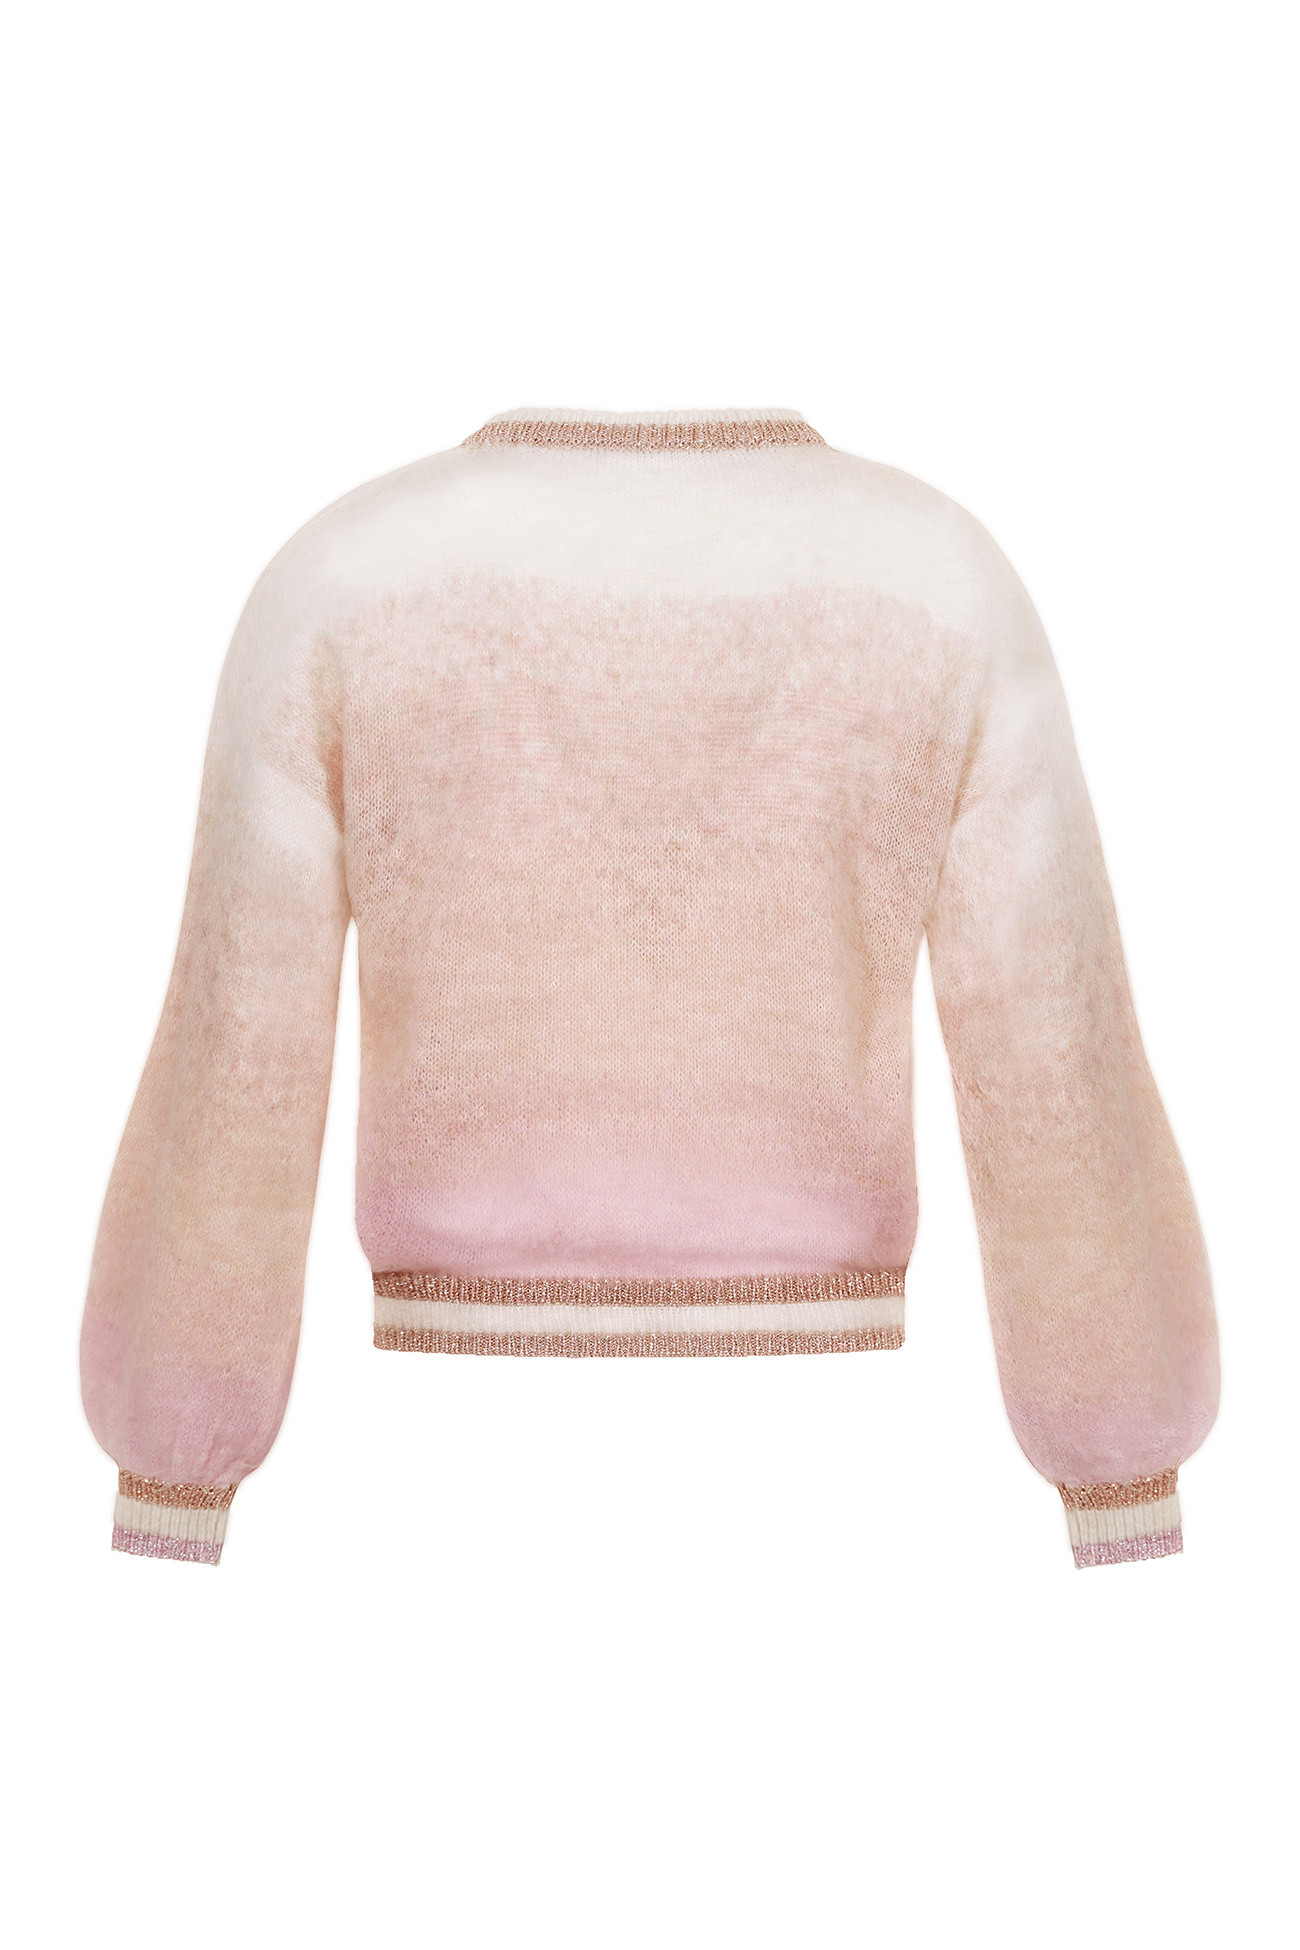 Bees - Annabel pullover, Pink, large image number 1